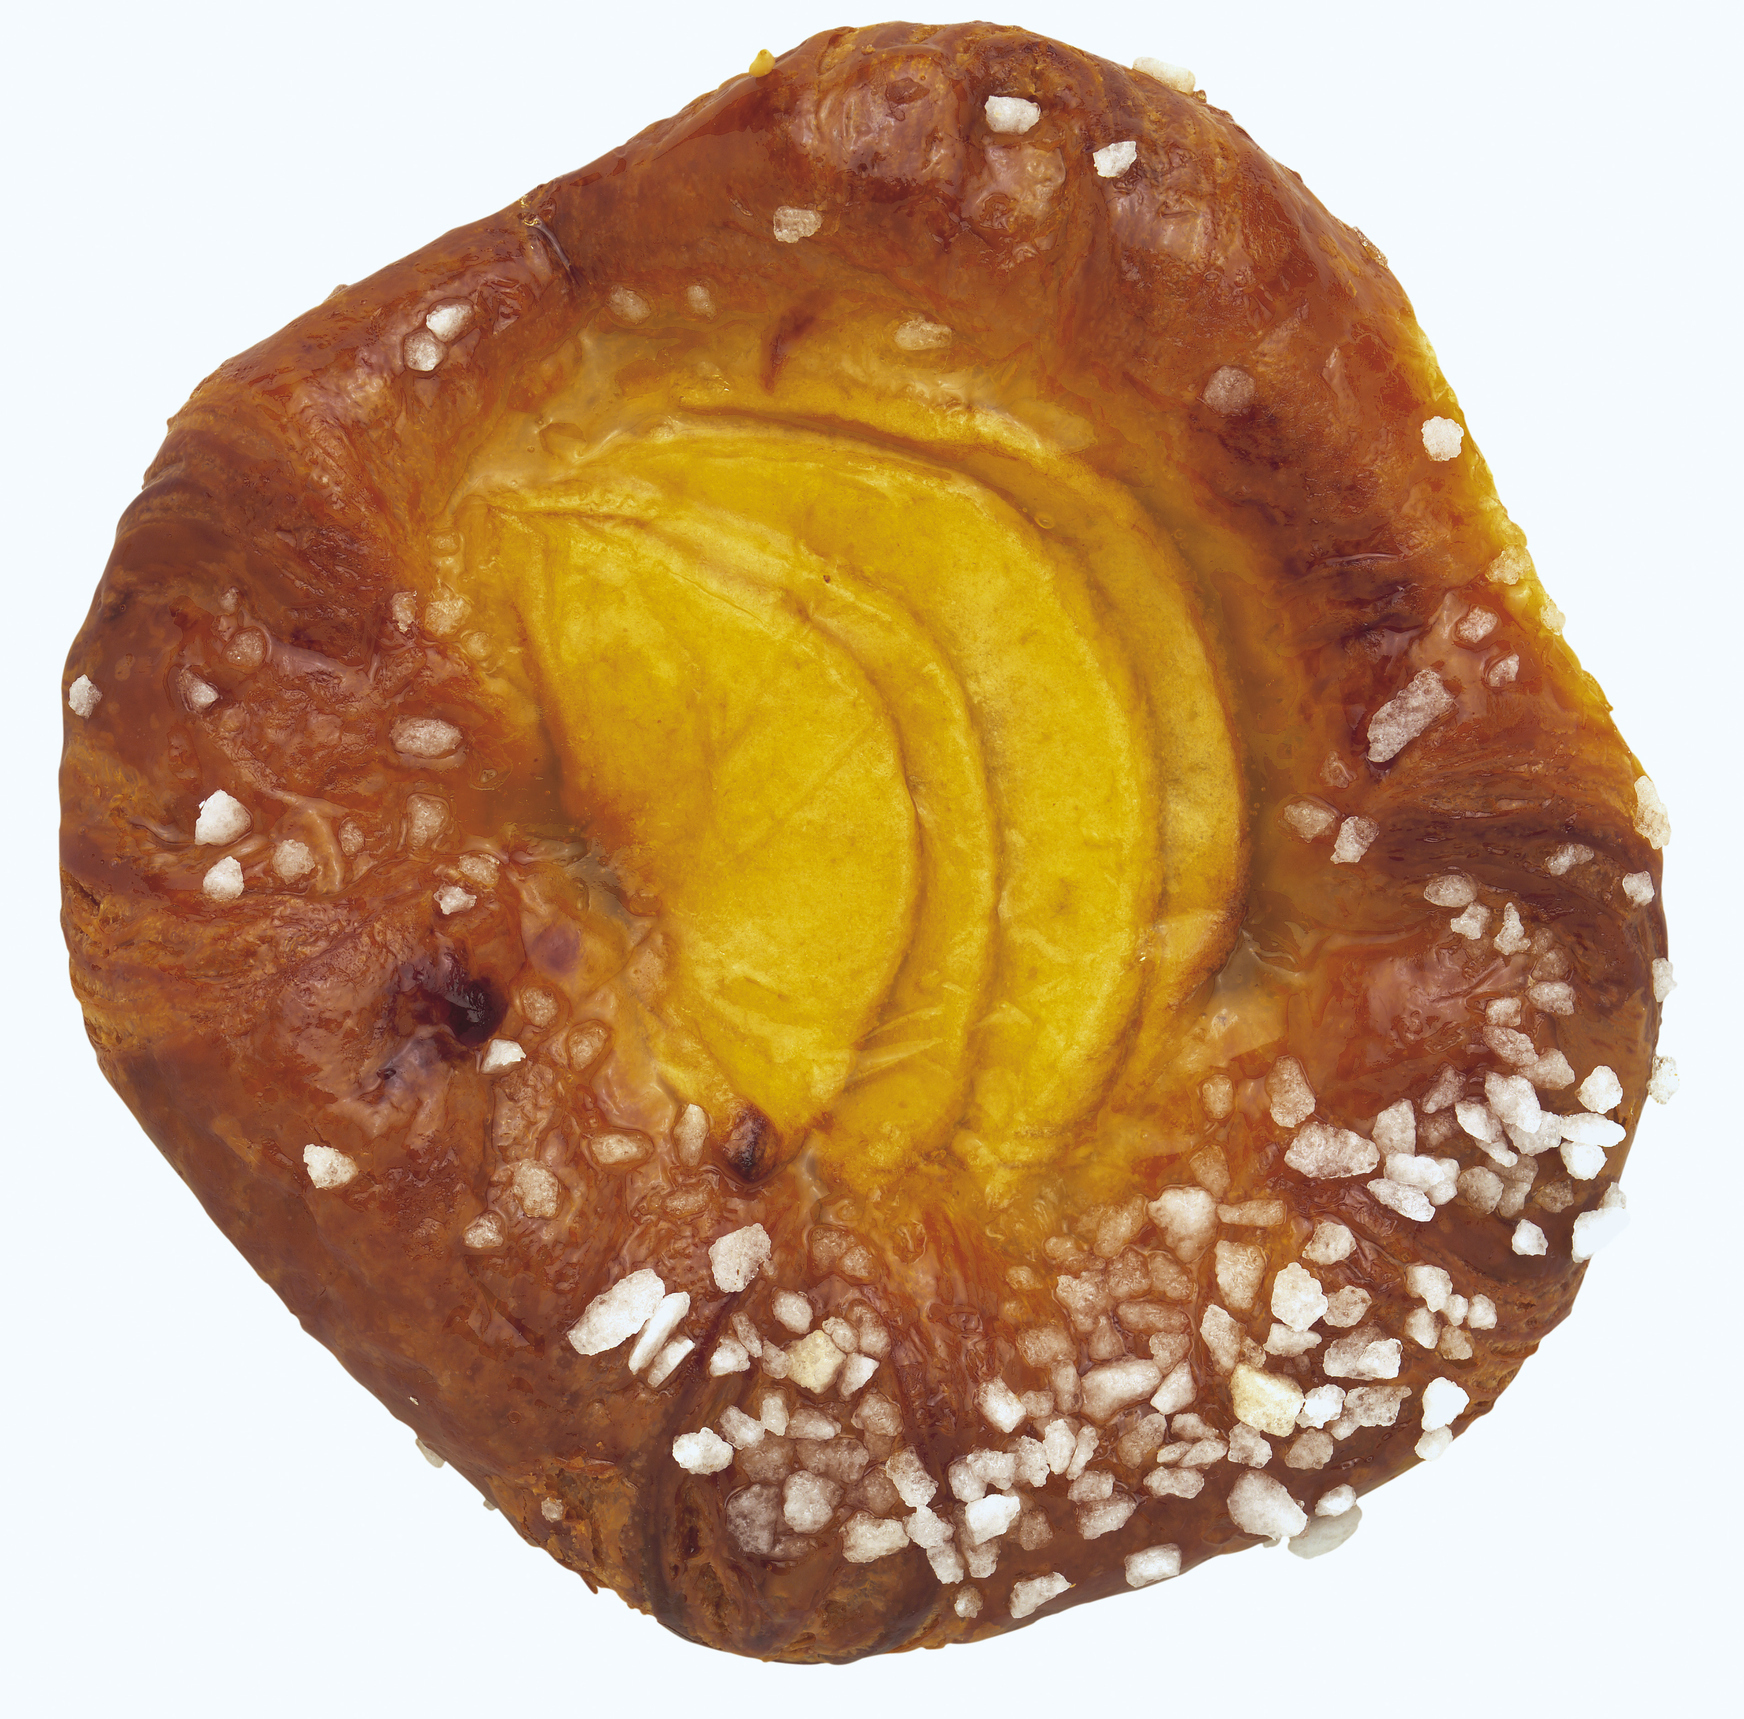 <p>For a tasty pastry that the adults will enjoy pairing with their after-dinner coffee and the kids will enjoy simply stuffing in their faces, <a href="http://www.tasteofhome.com/recipes/apple-danish">check out this apple danish recipe from TasteOfHome.com.</a></p><p><a href='https://www.msn.com/en-us/community/channel/vid-cj9pqbr0vn9in2b6ddcd8sfgpfq6x6utp44fssrv6mc2gtybw0us'>Follow us on MSN to see more of our exclusive lifestyle content.</a></p>